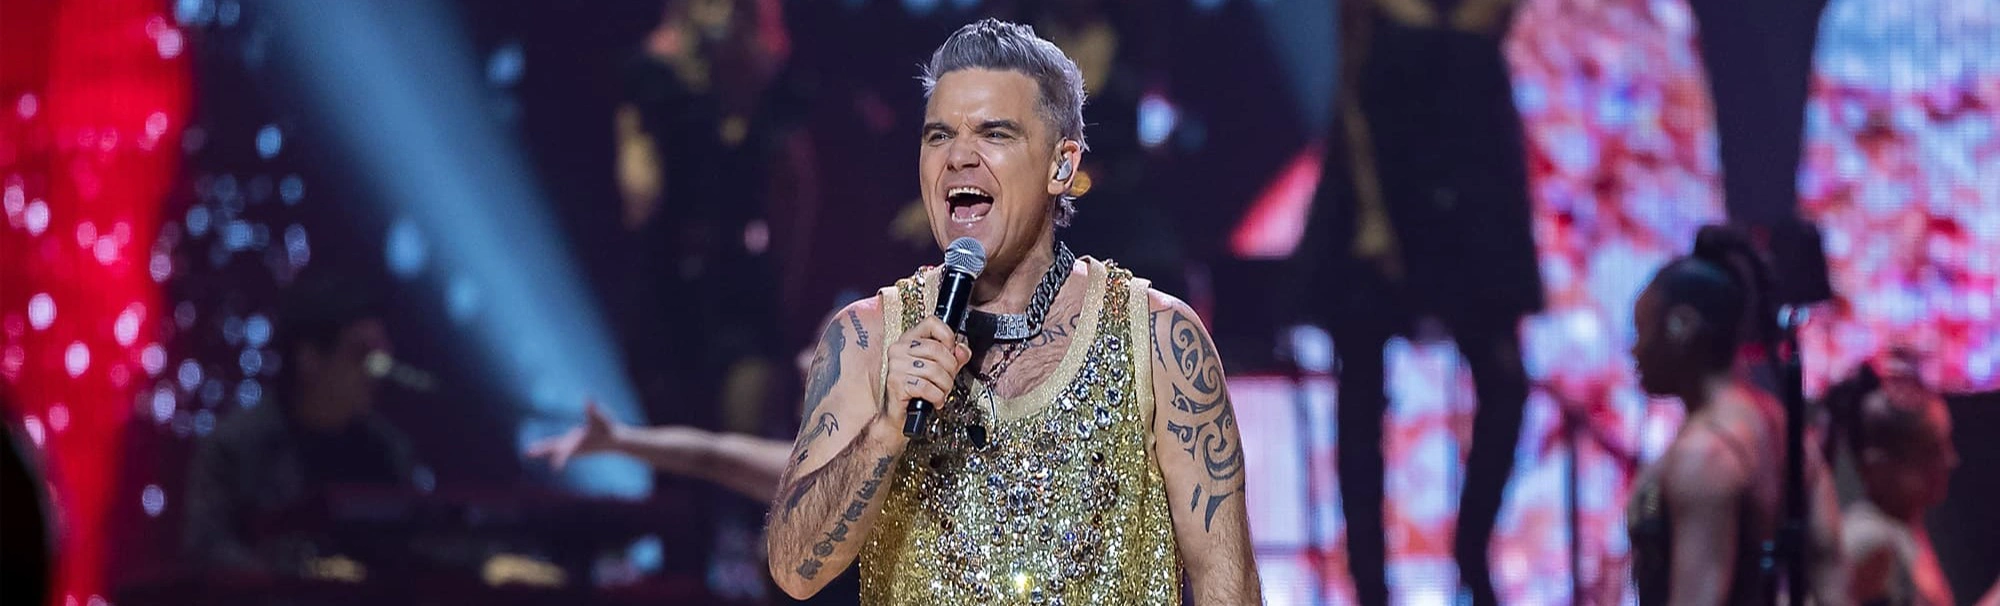 Robbie Williams announces upcoming documentary about his life